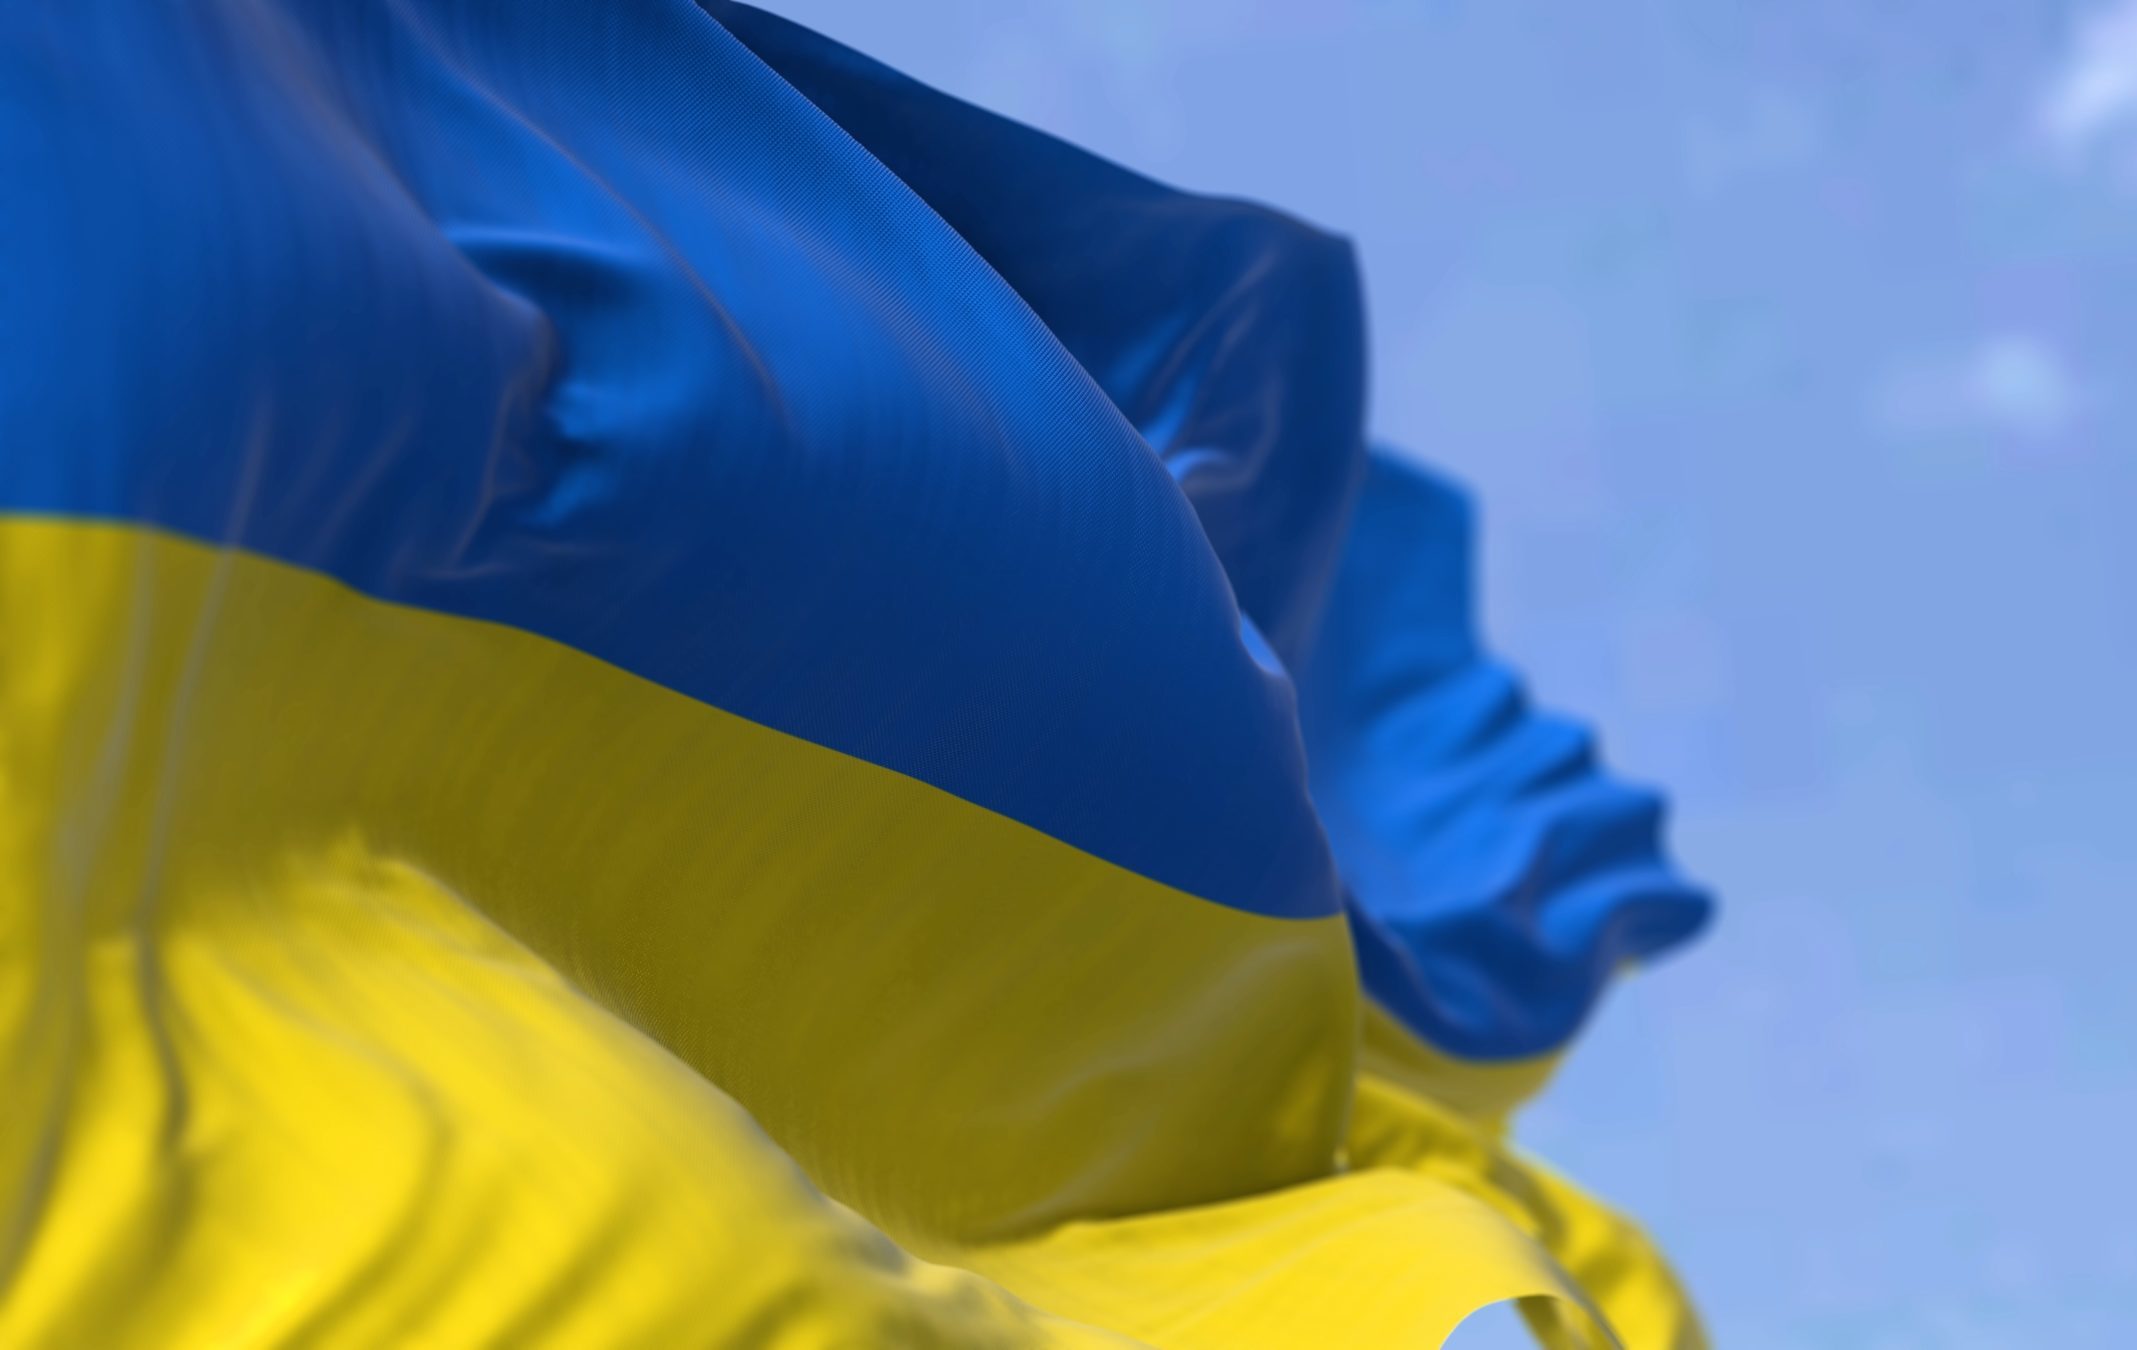 Detail,Of,The,National,Flag,Of,Ukraine,Waving,In,The